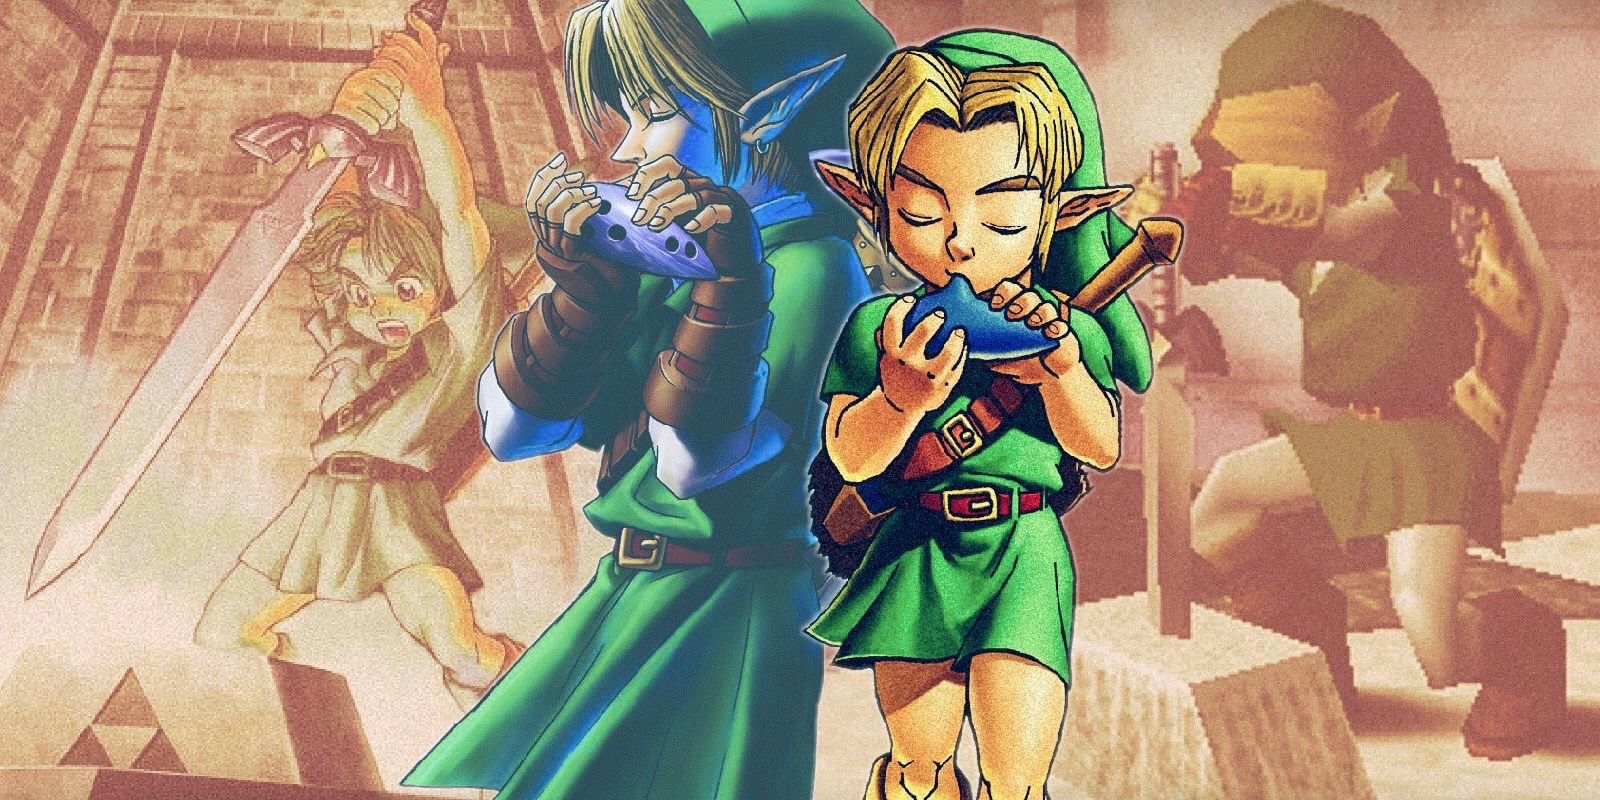 Young Link and Adult Link pull the master sword in the legend of Zelda ocarina of time